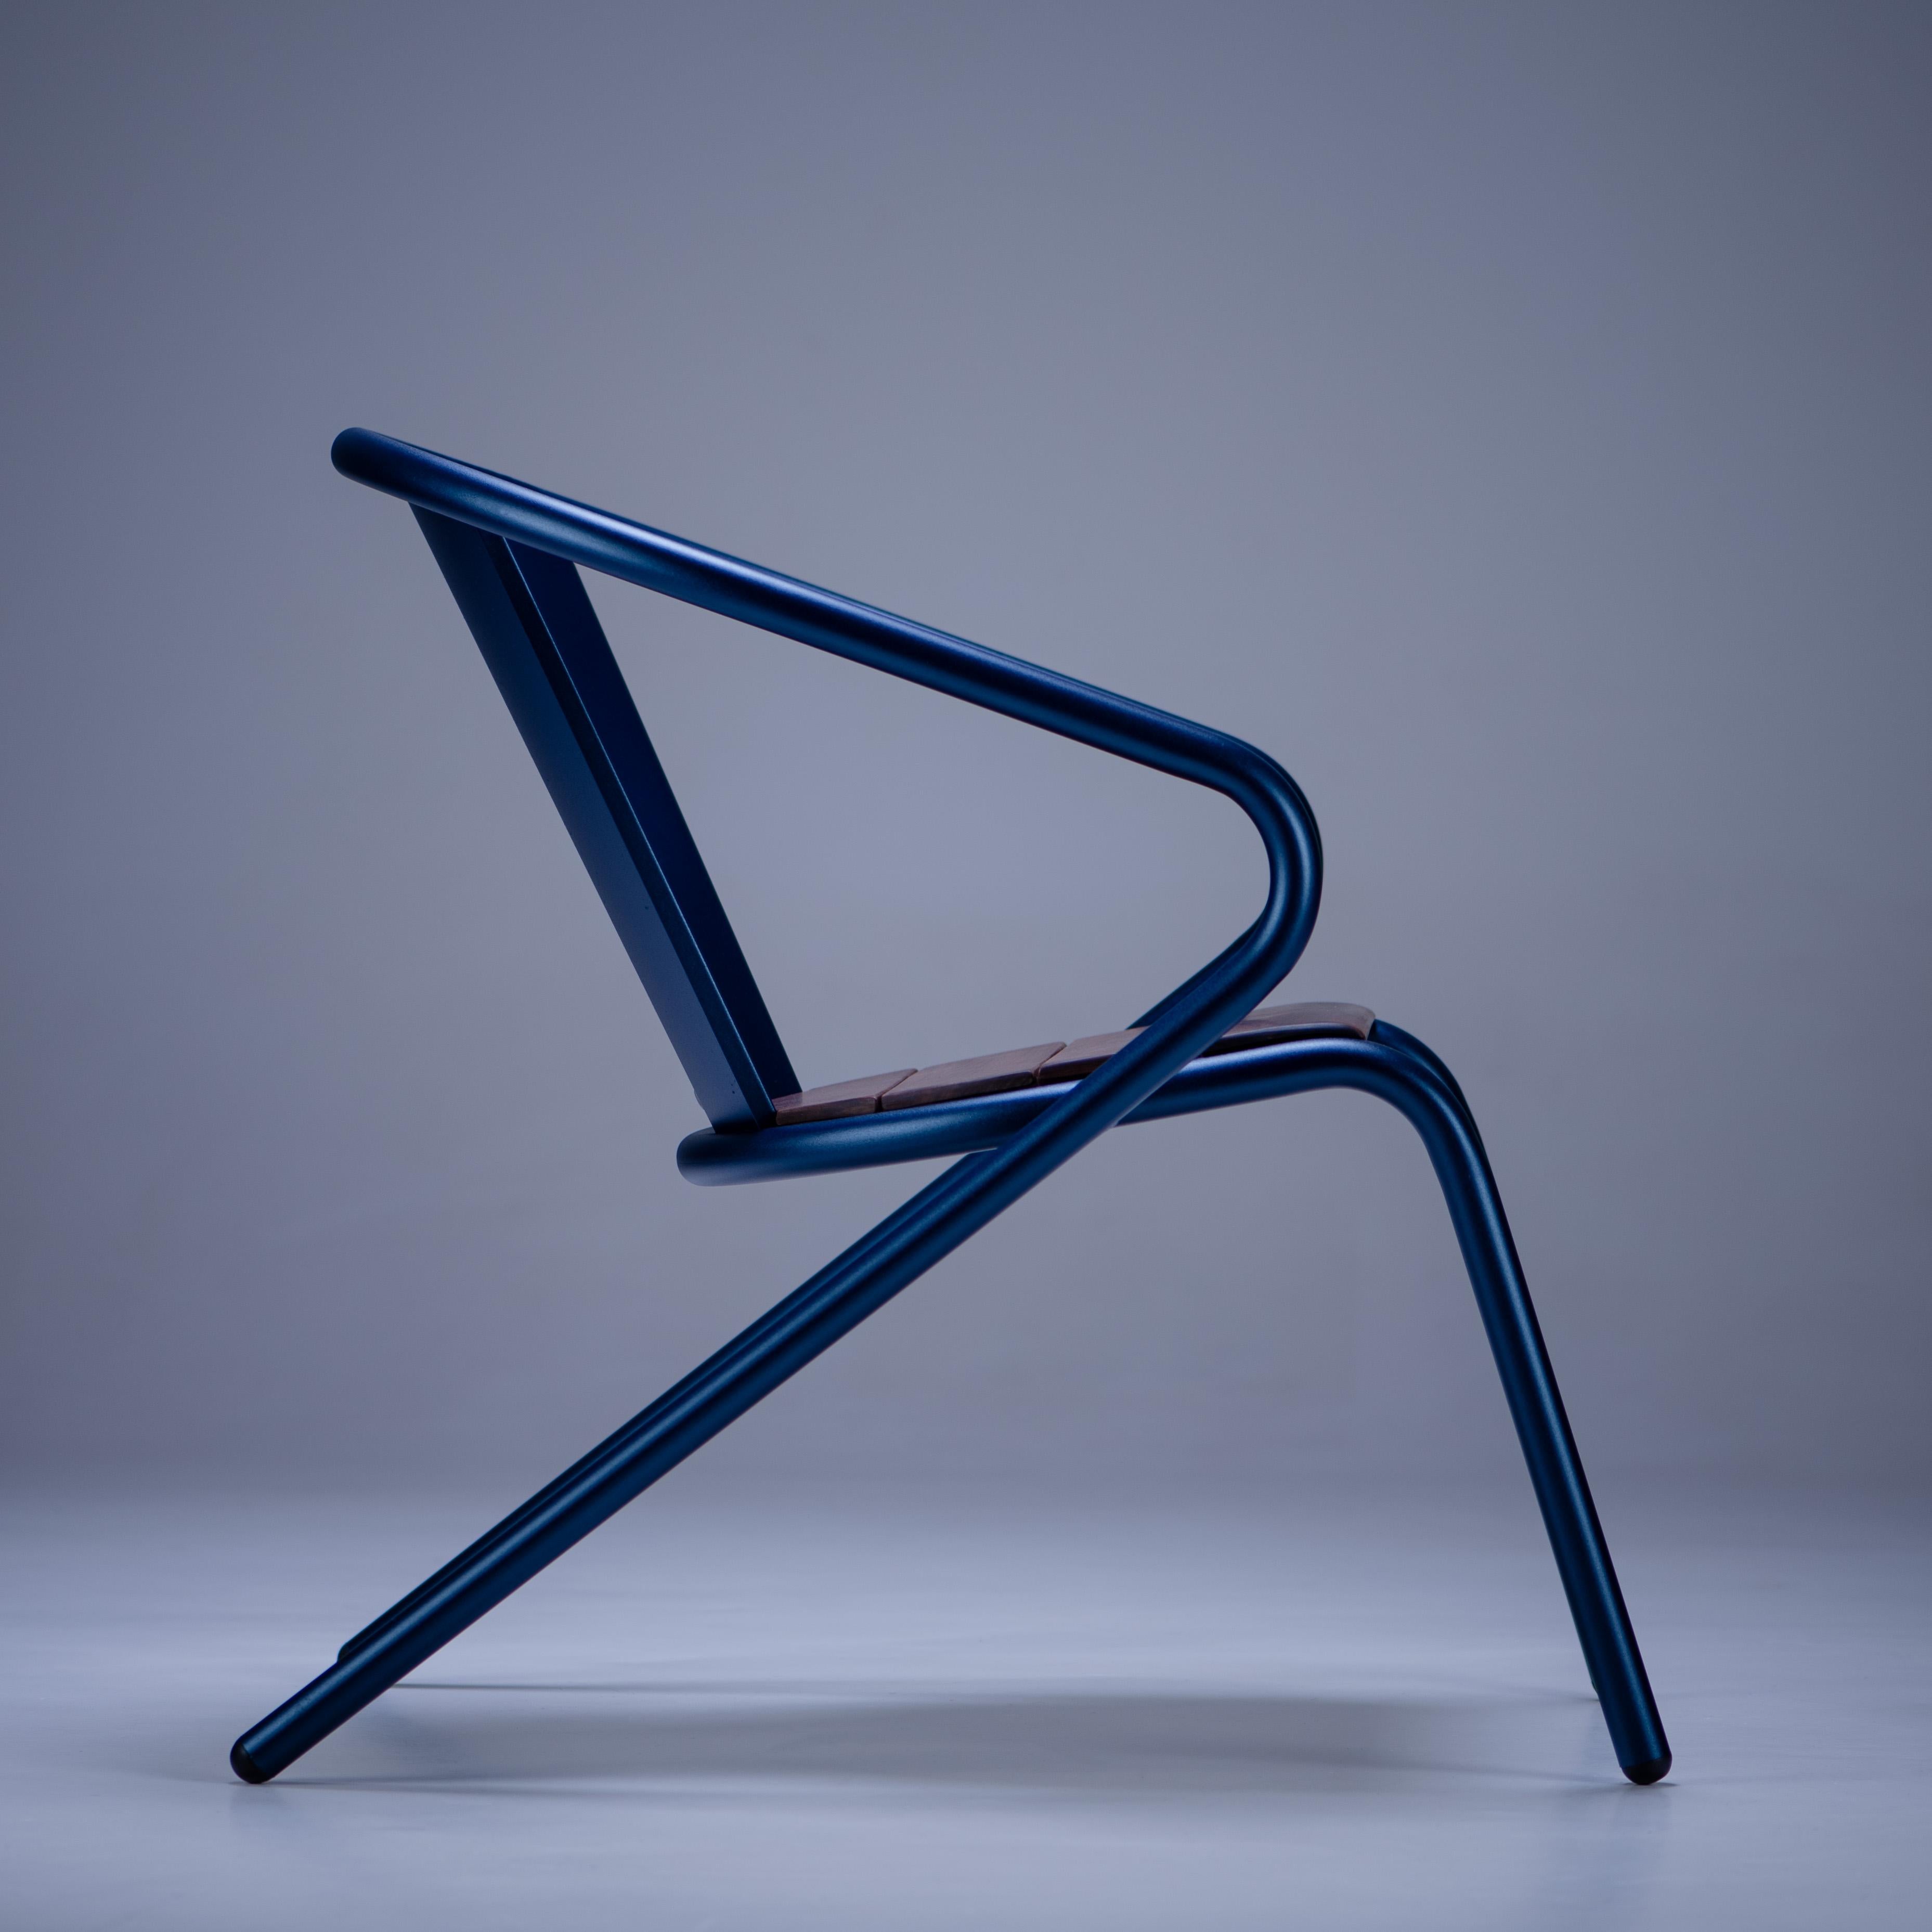 BICAlounge is a sustainable stackable steel Lounge Chair made for the outdoors from recycled and recyclable steel and finished with our premium selection of powder-coating colors, in this case in a rich textured blue color, that transforms a Classic